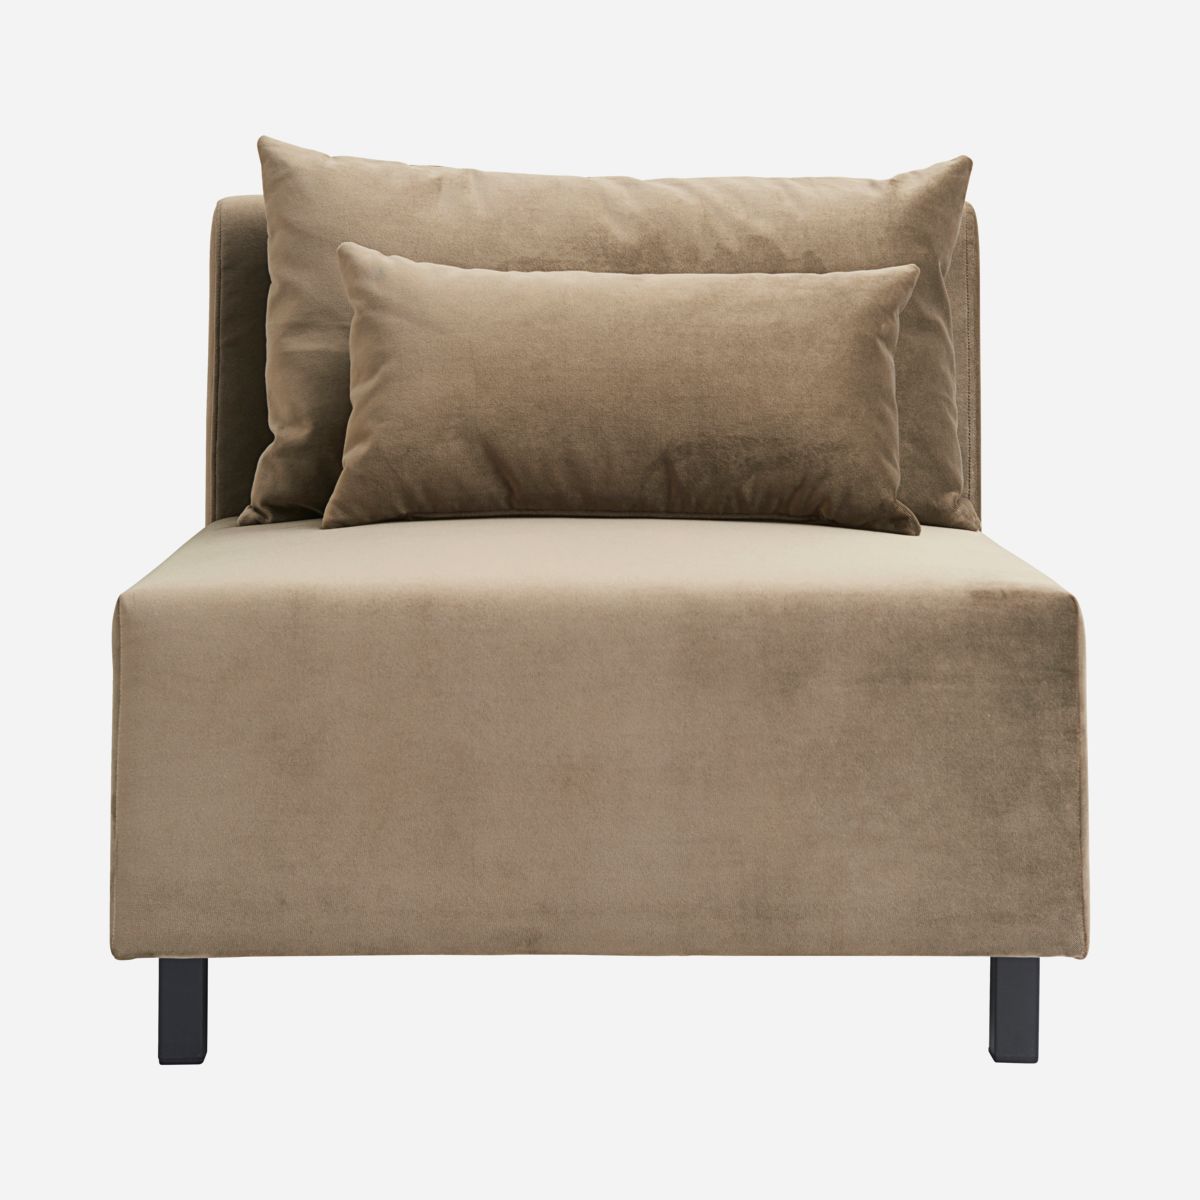 Sofa, Middle section, Slow, Sand